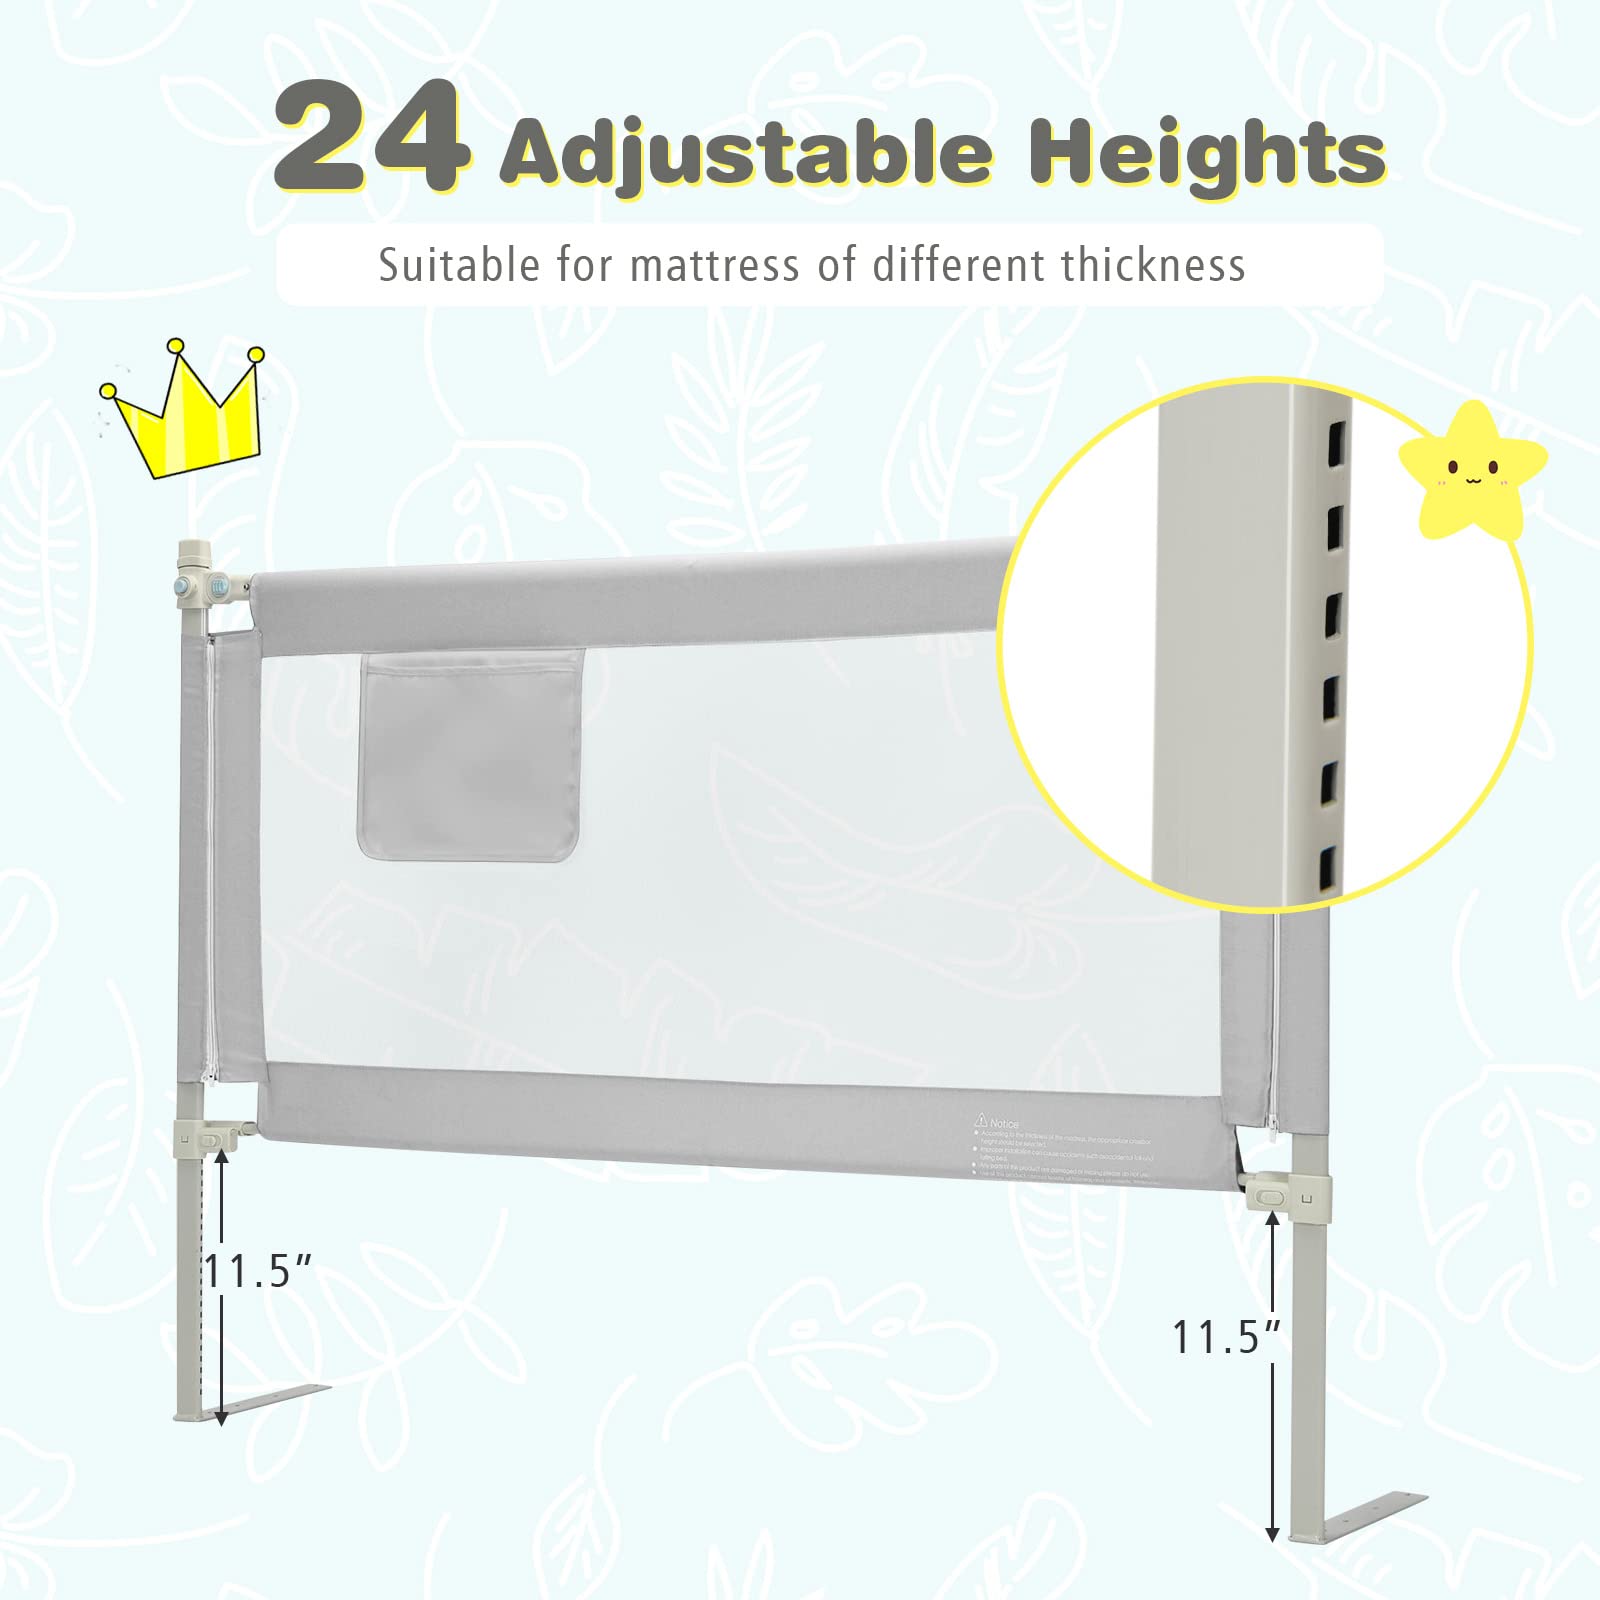 BABY JOY Bed Rail for Toddlers, 57’’ Extra Long, Height Adjustable & Foldable Baby Bed Rail Guard w/Storage Pocket & Double Safety Child Lock for Kids Twin Double Full Size Queen King Mattress (Gray)